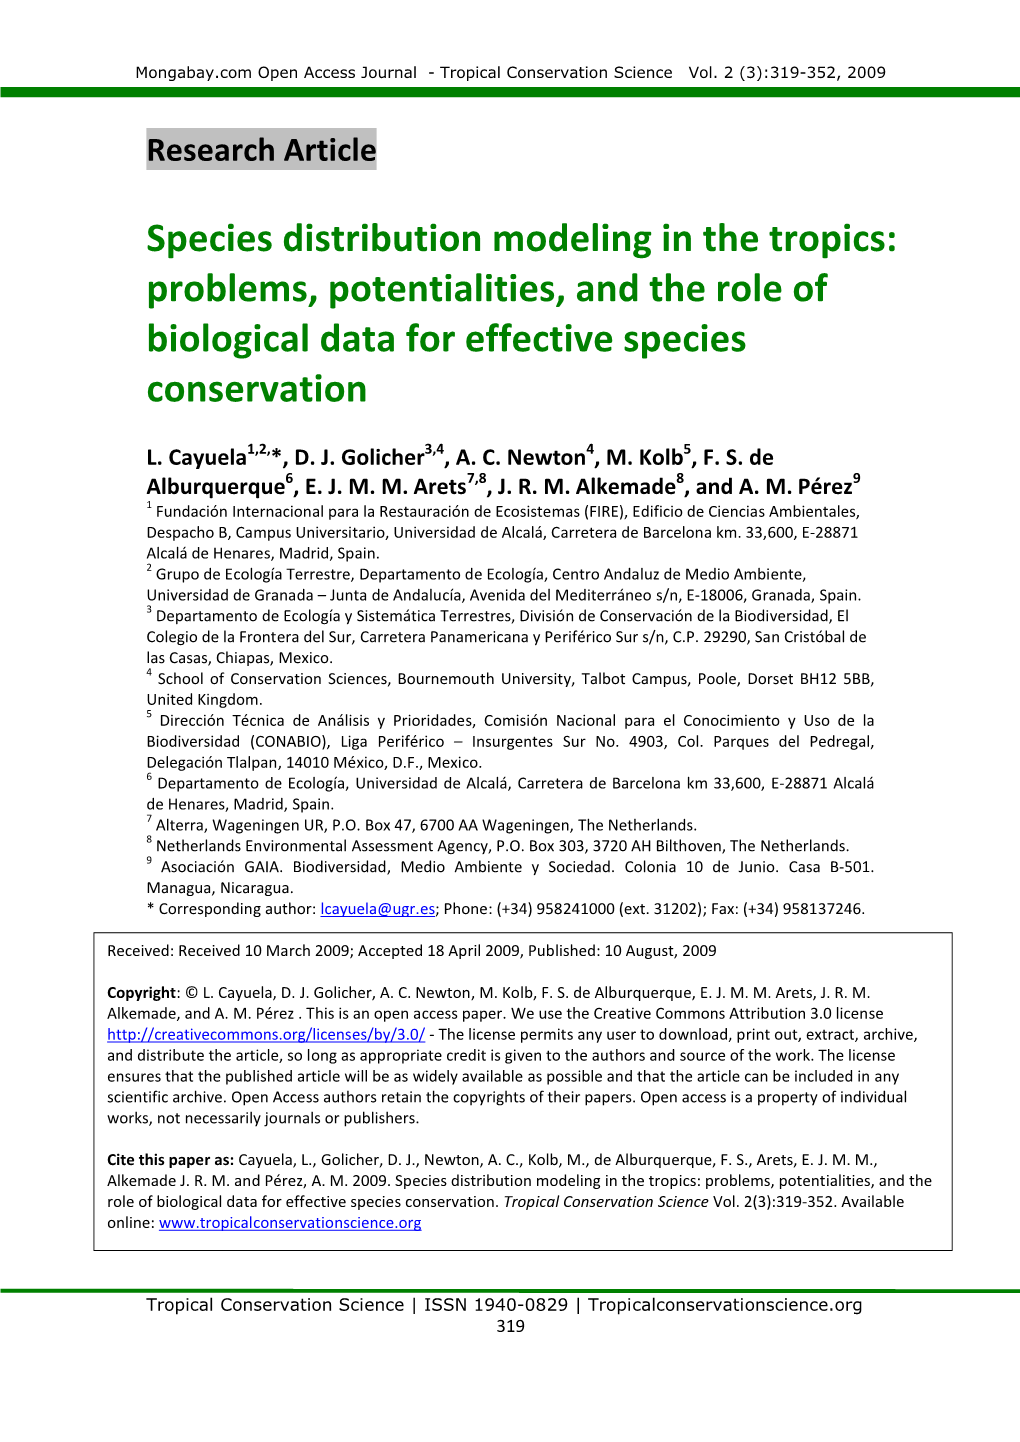 Problems, Potentialities, and the Role of Biological Data for Effective Species Conservation